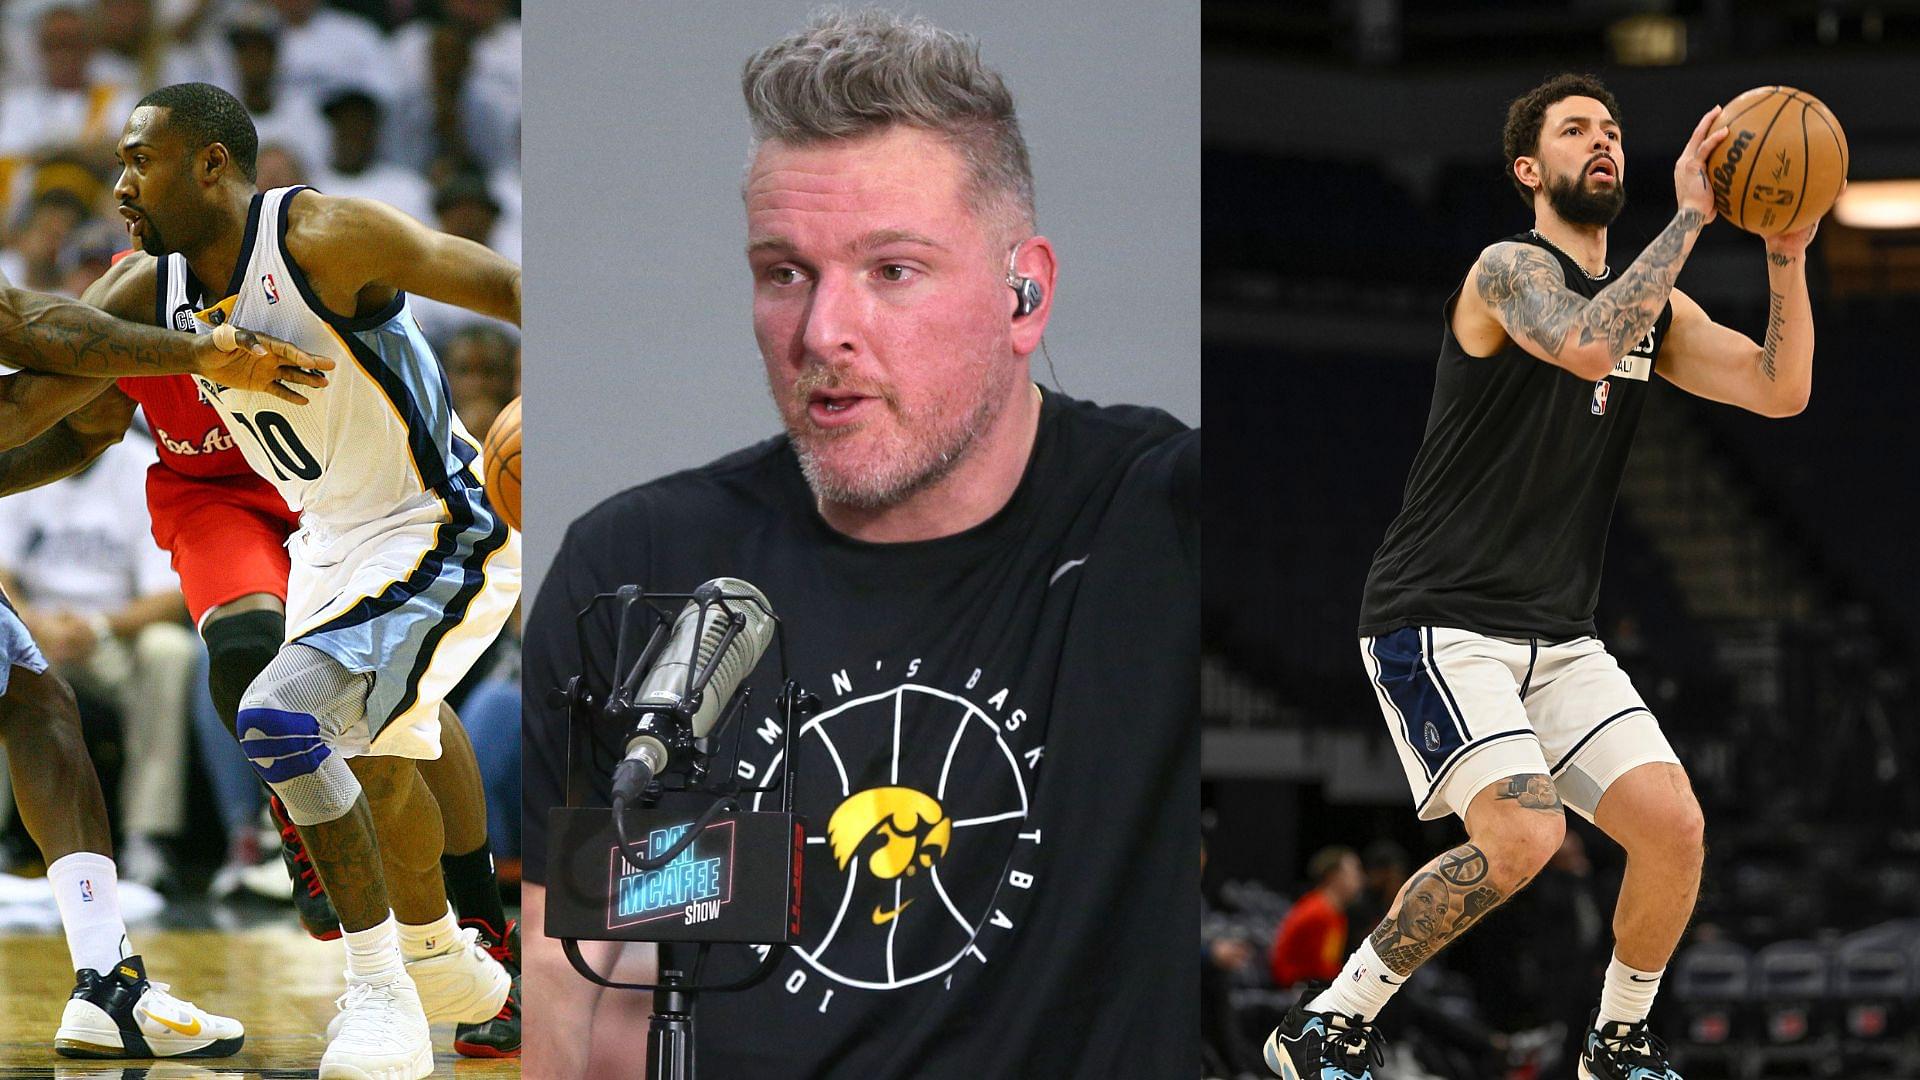 “Pat McAfee Proved His Point”: Gilbert Arenas Reacts to Austin Rivers Sparring With NFL Legend